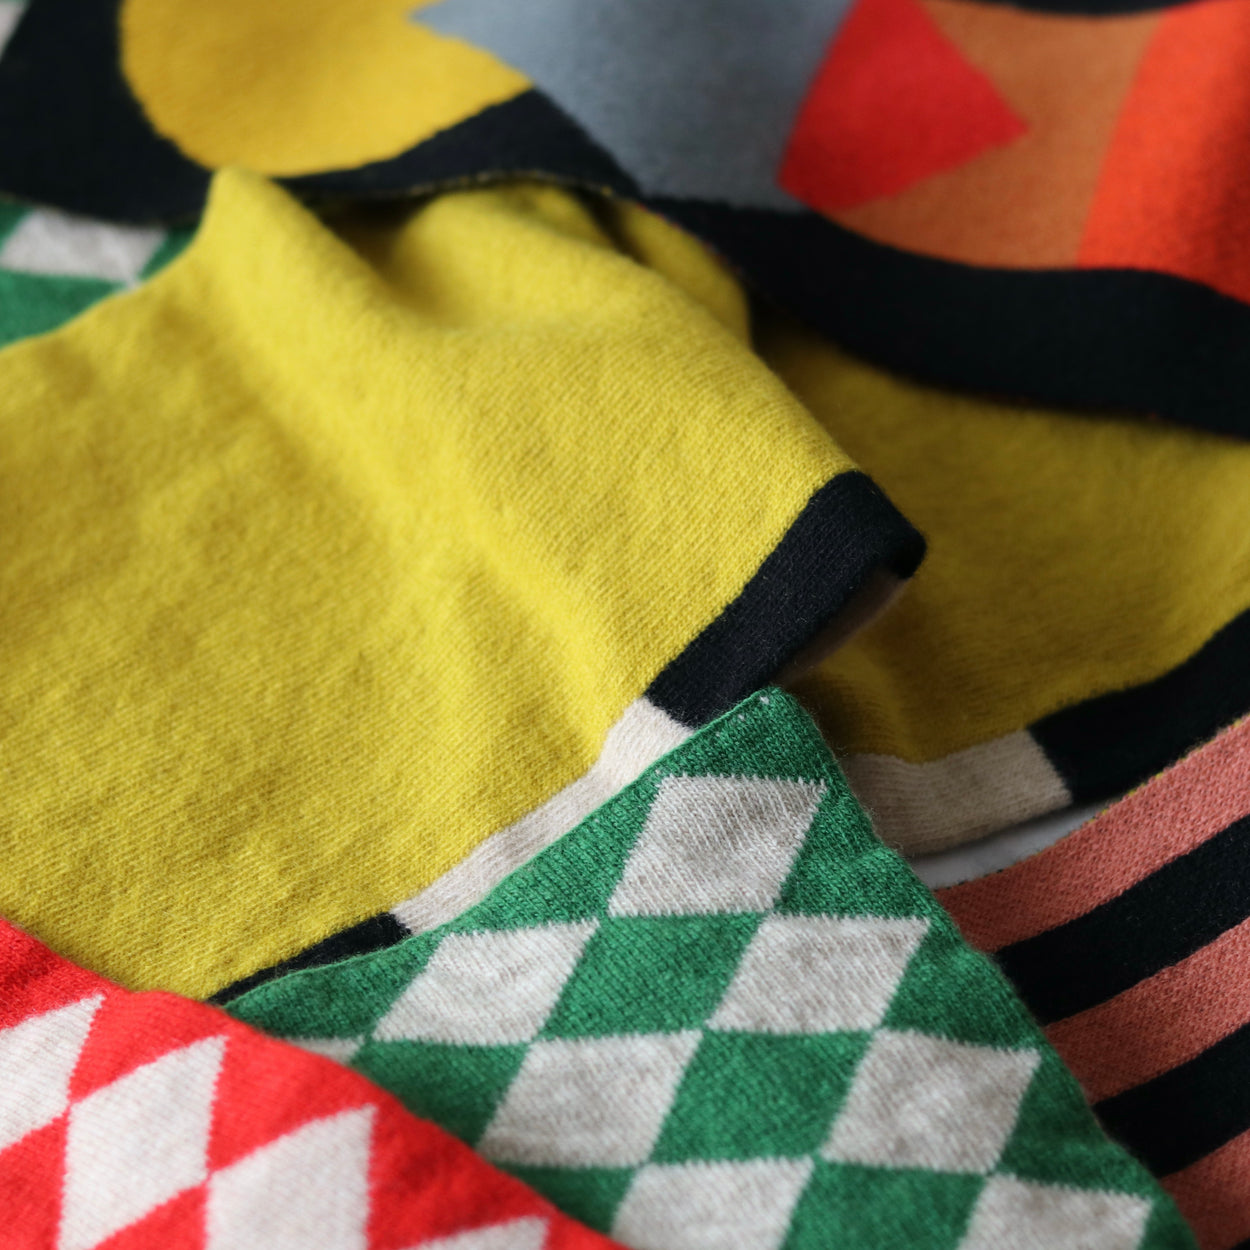 Assorted colourful Jo Gordon scarves criss crossed on top of each other.